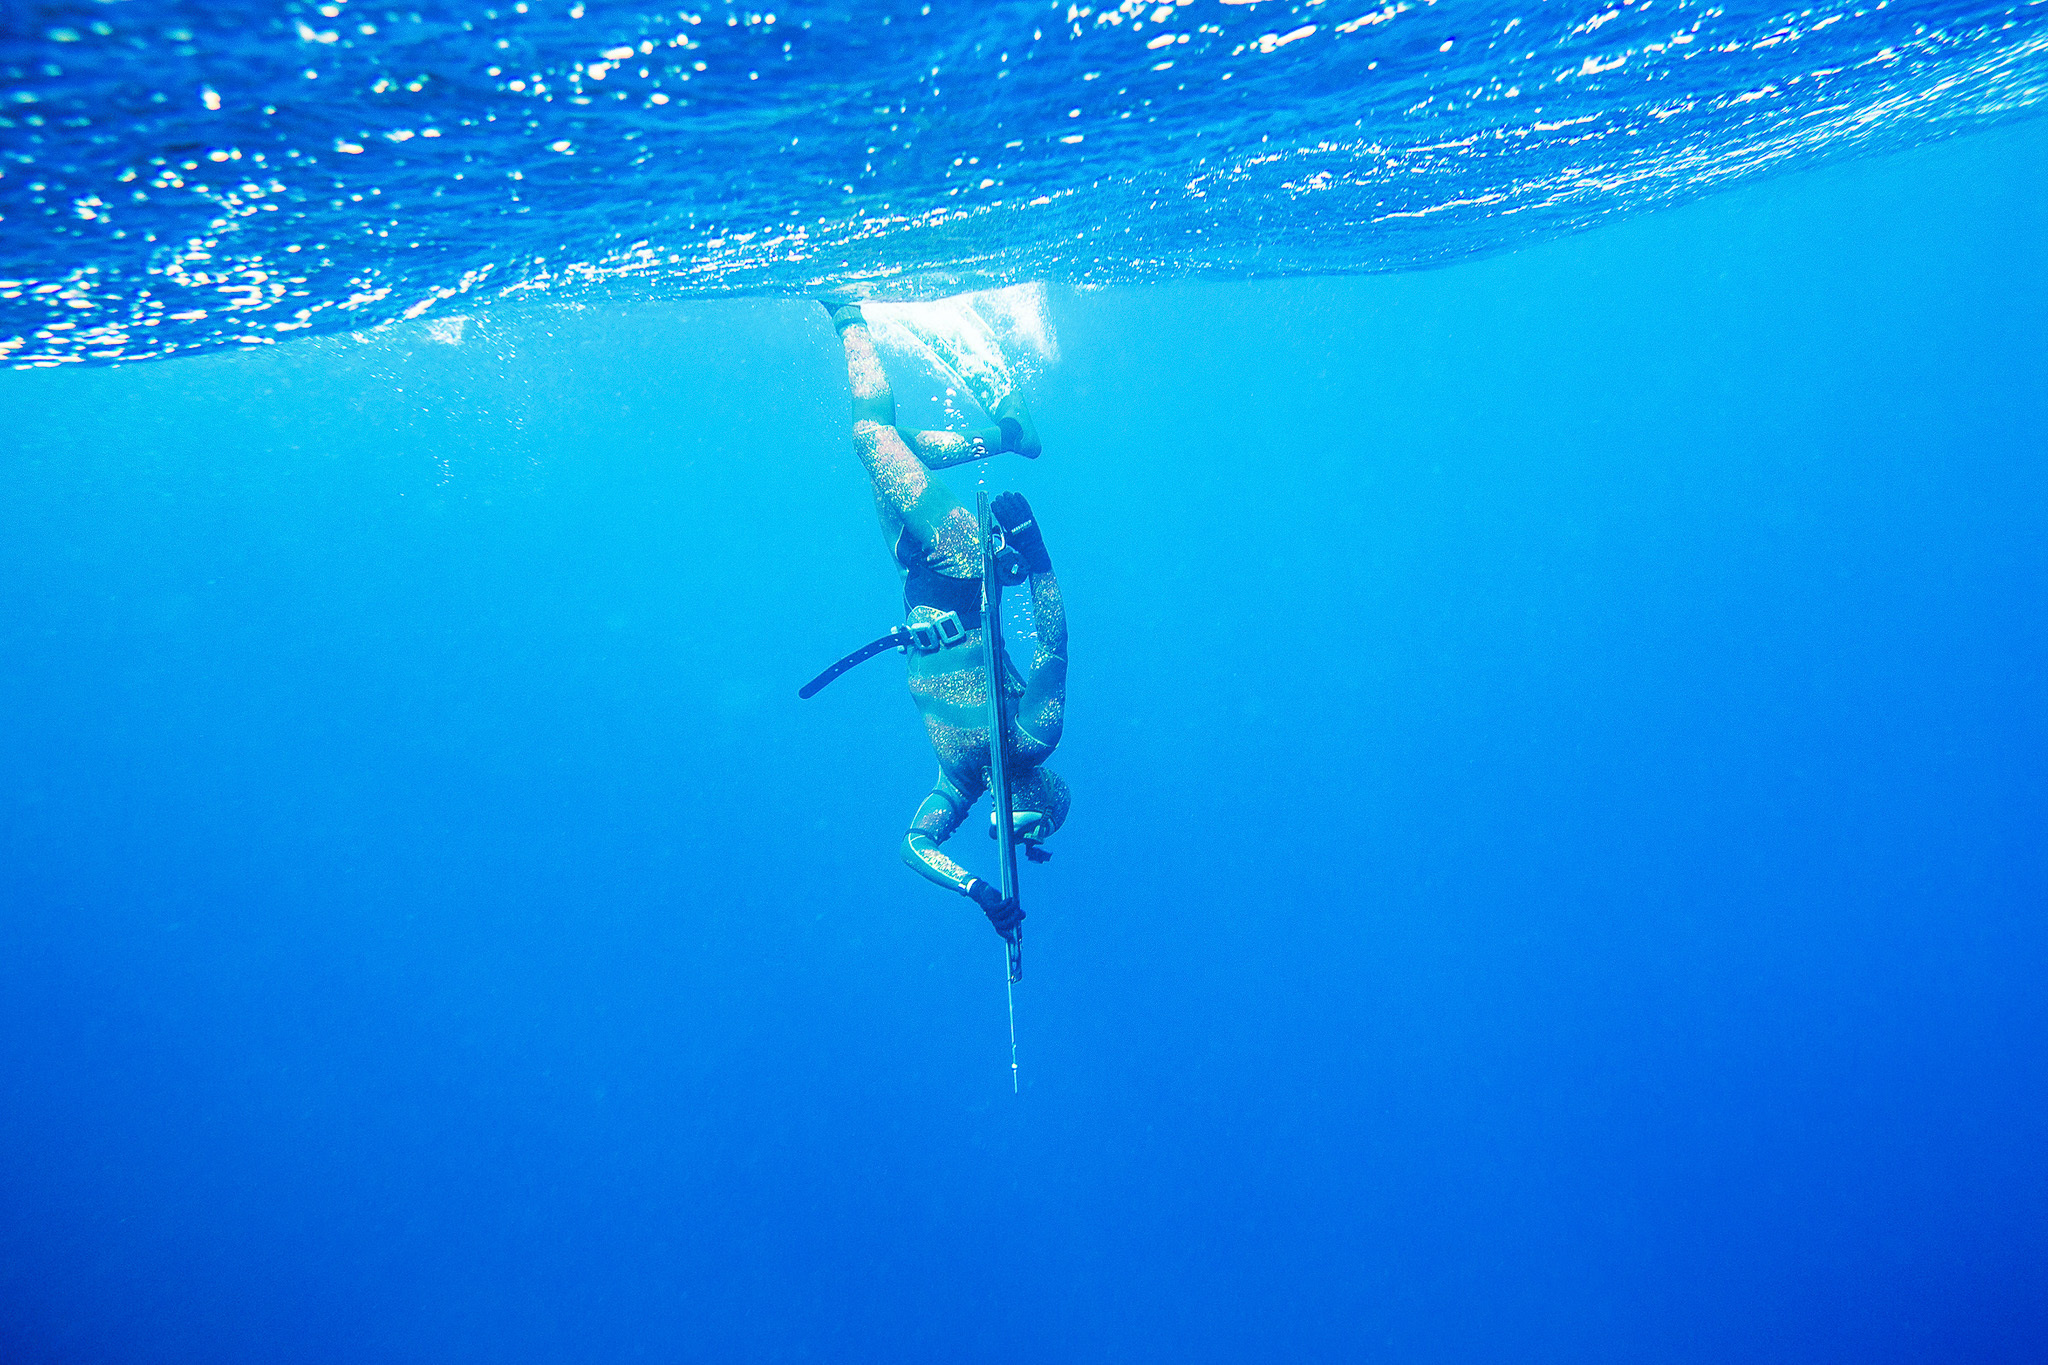 A spearfisherman freedives straight down in the ocean.